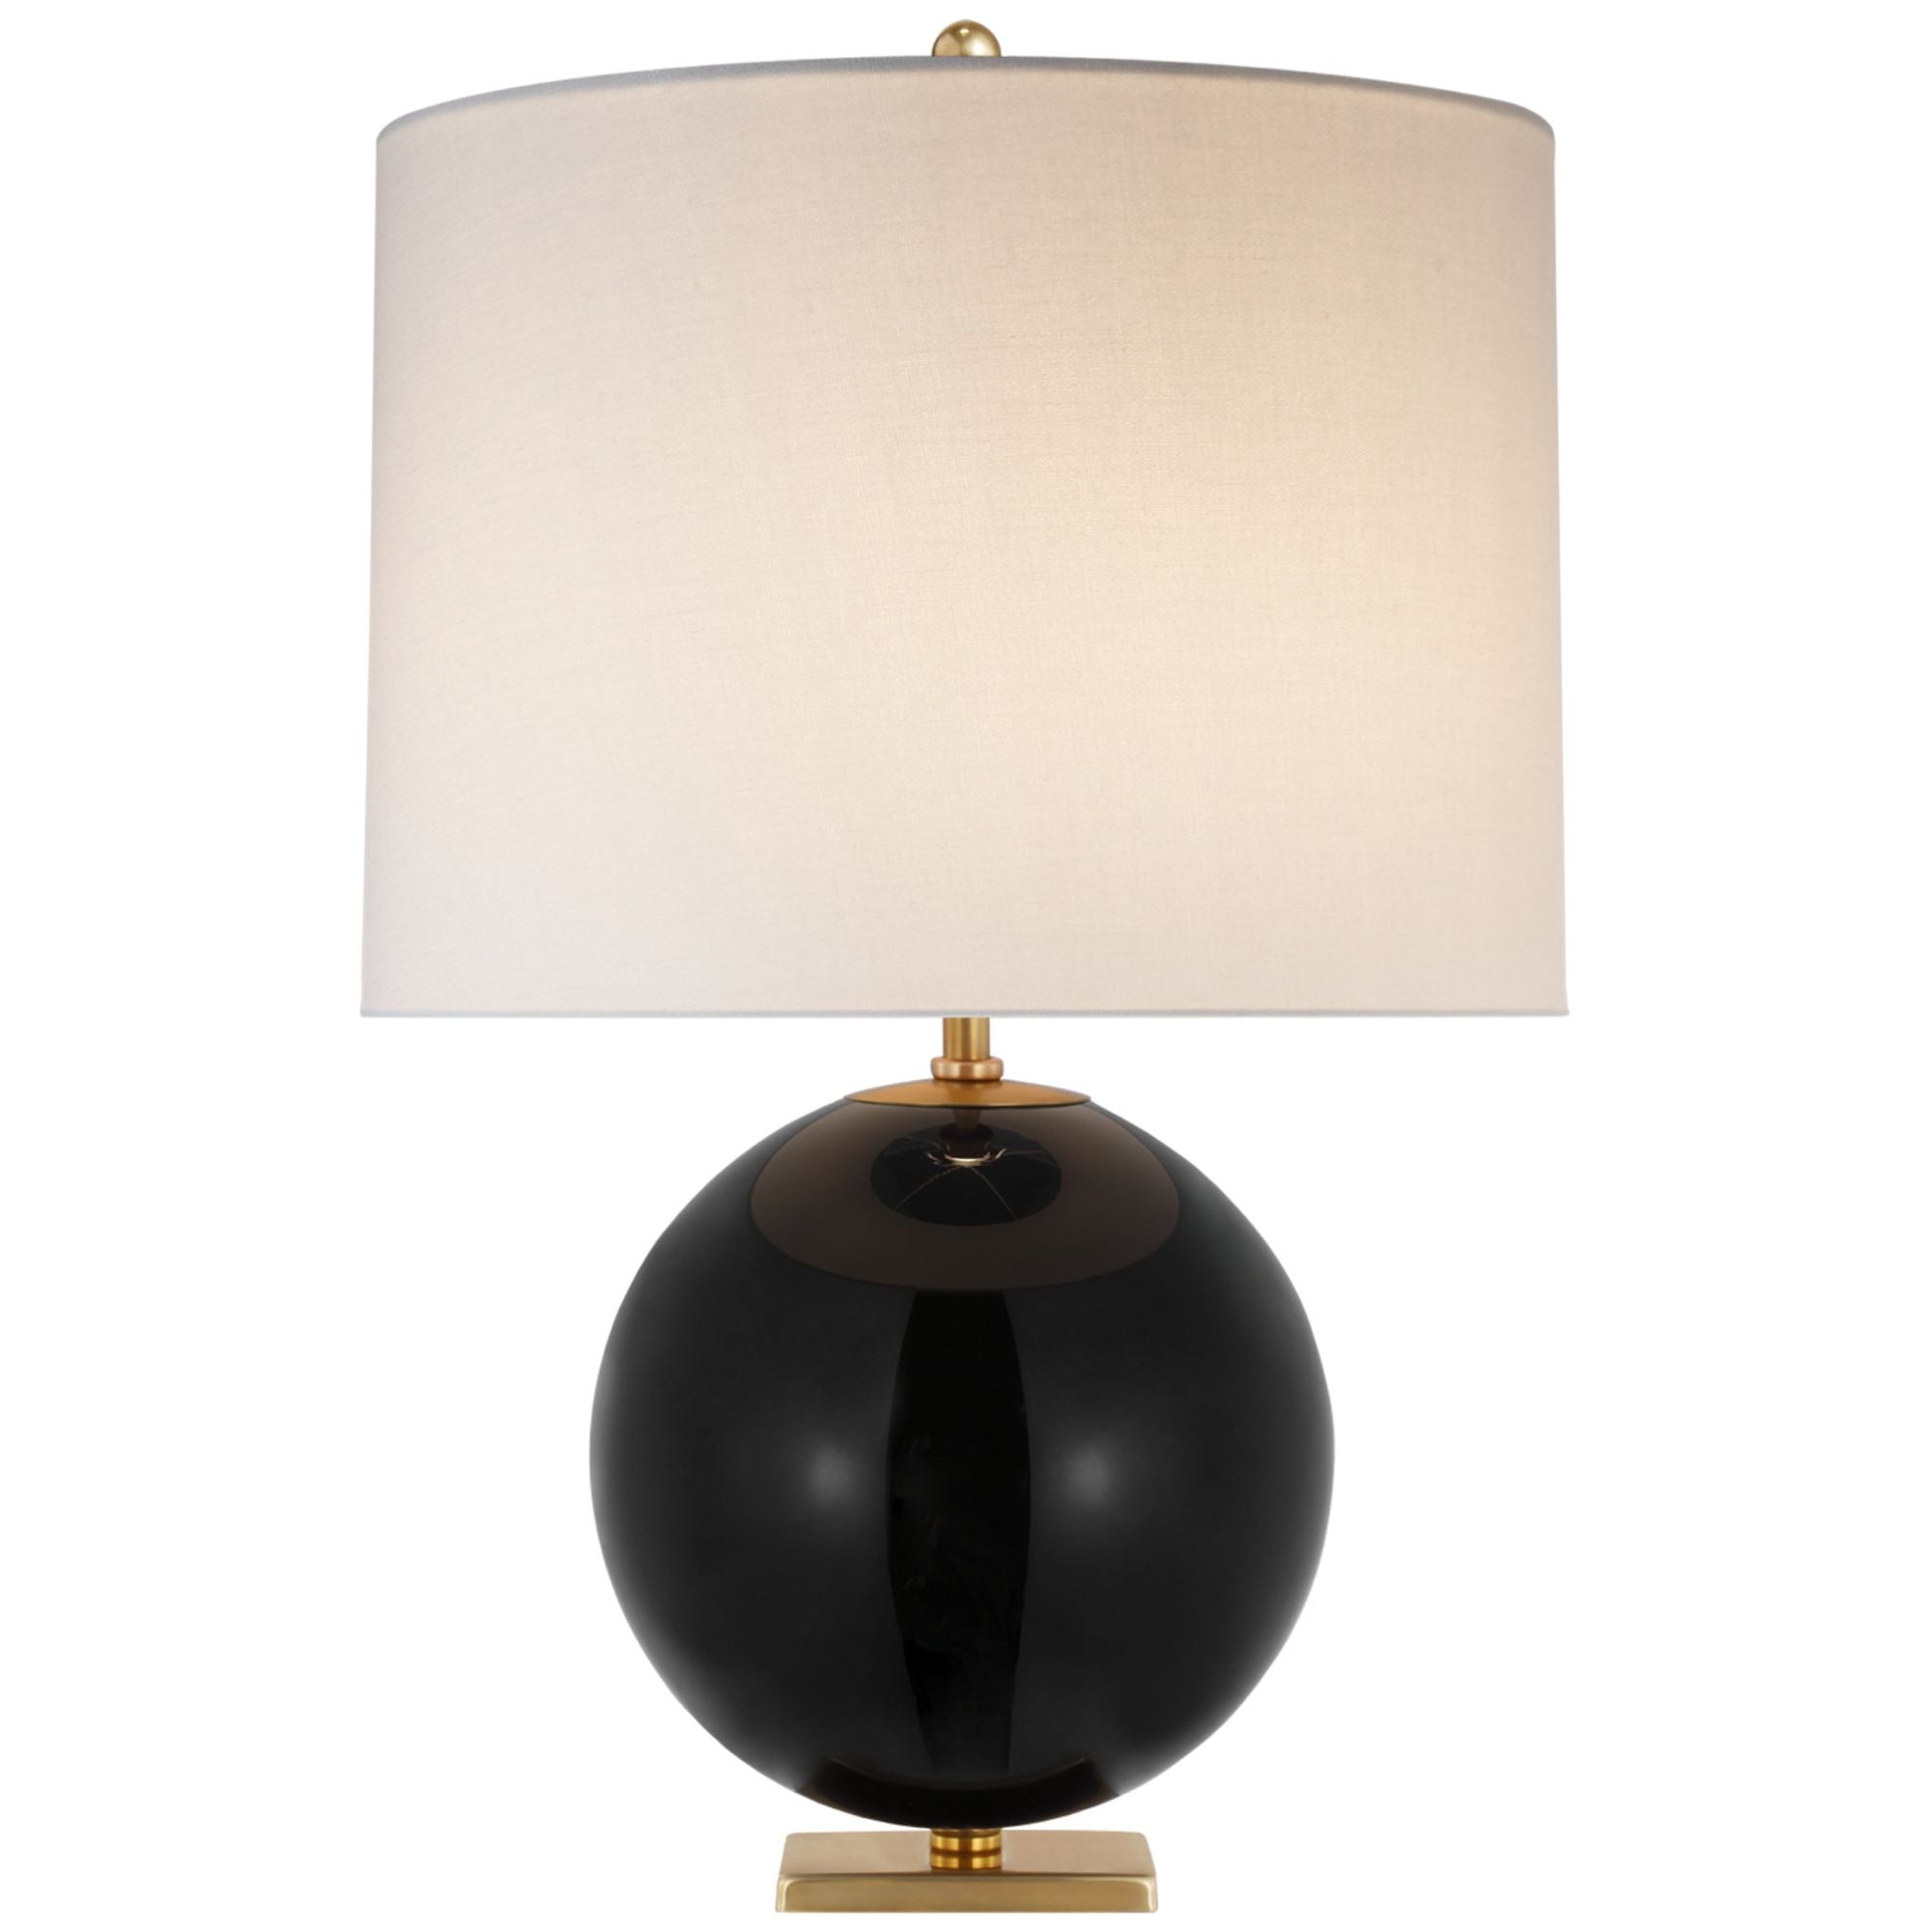 kate spade new york Elsie Table Lamp in Black Reverse Painted Glass with Linen Shade